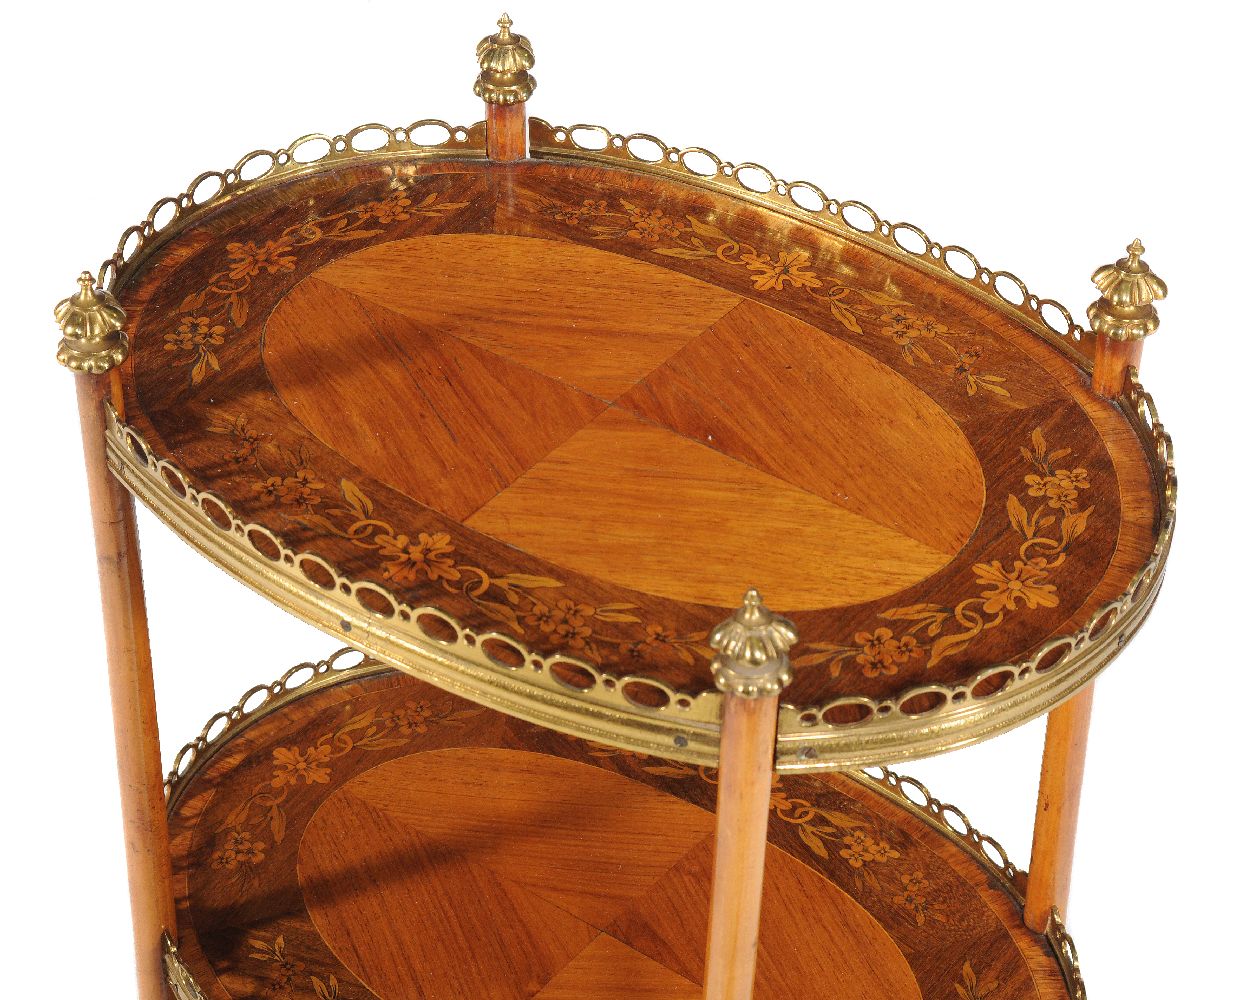 A rosewood, marquetry inlaid, and gilt metal mounted étagère - Image 2 of 2